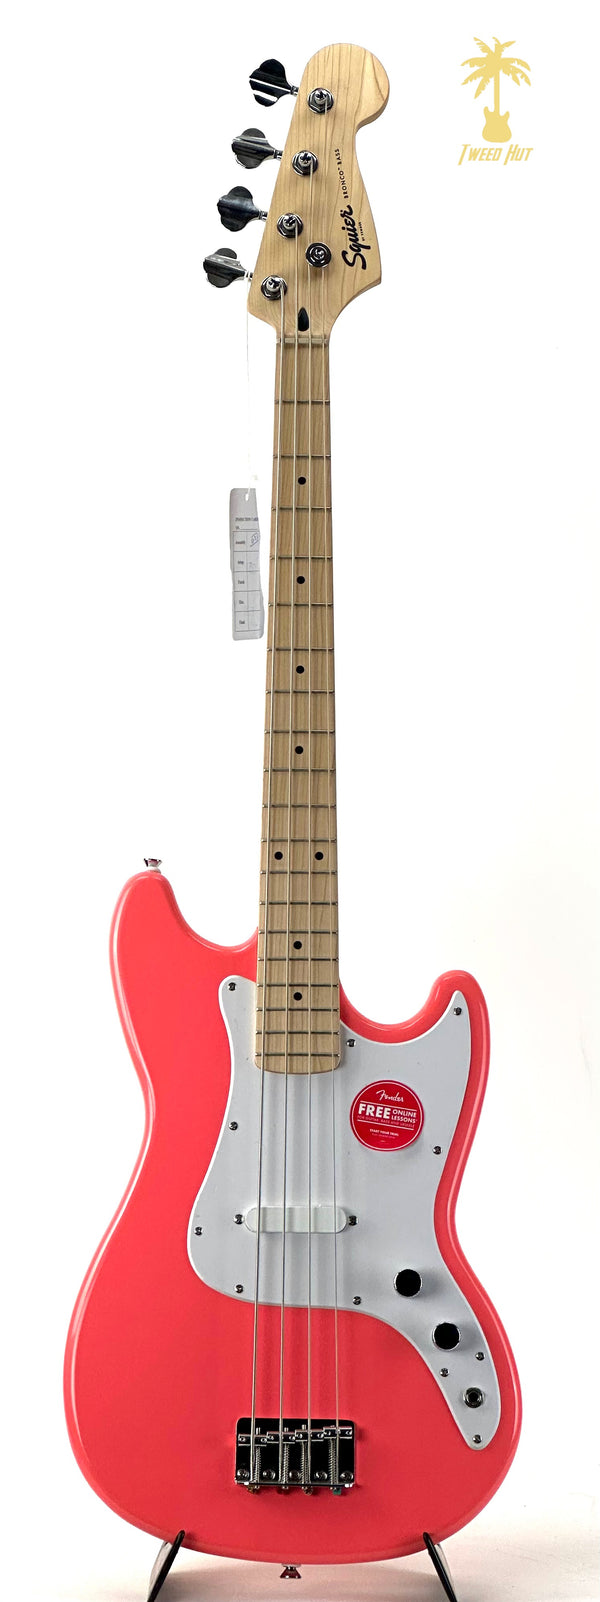 SQUIER SONIC BRONCO BASS TAHITIAN CORAL